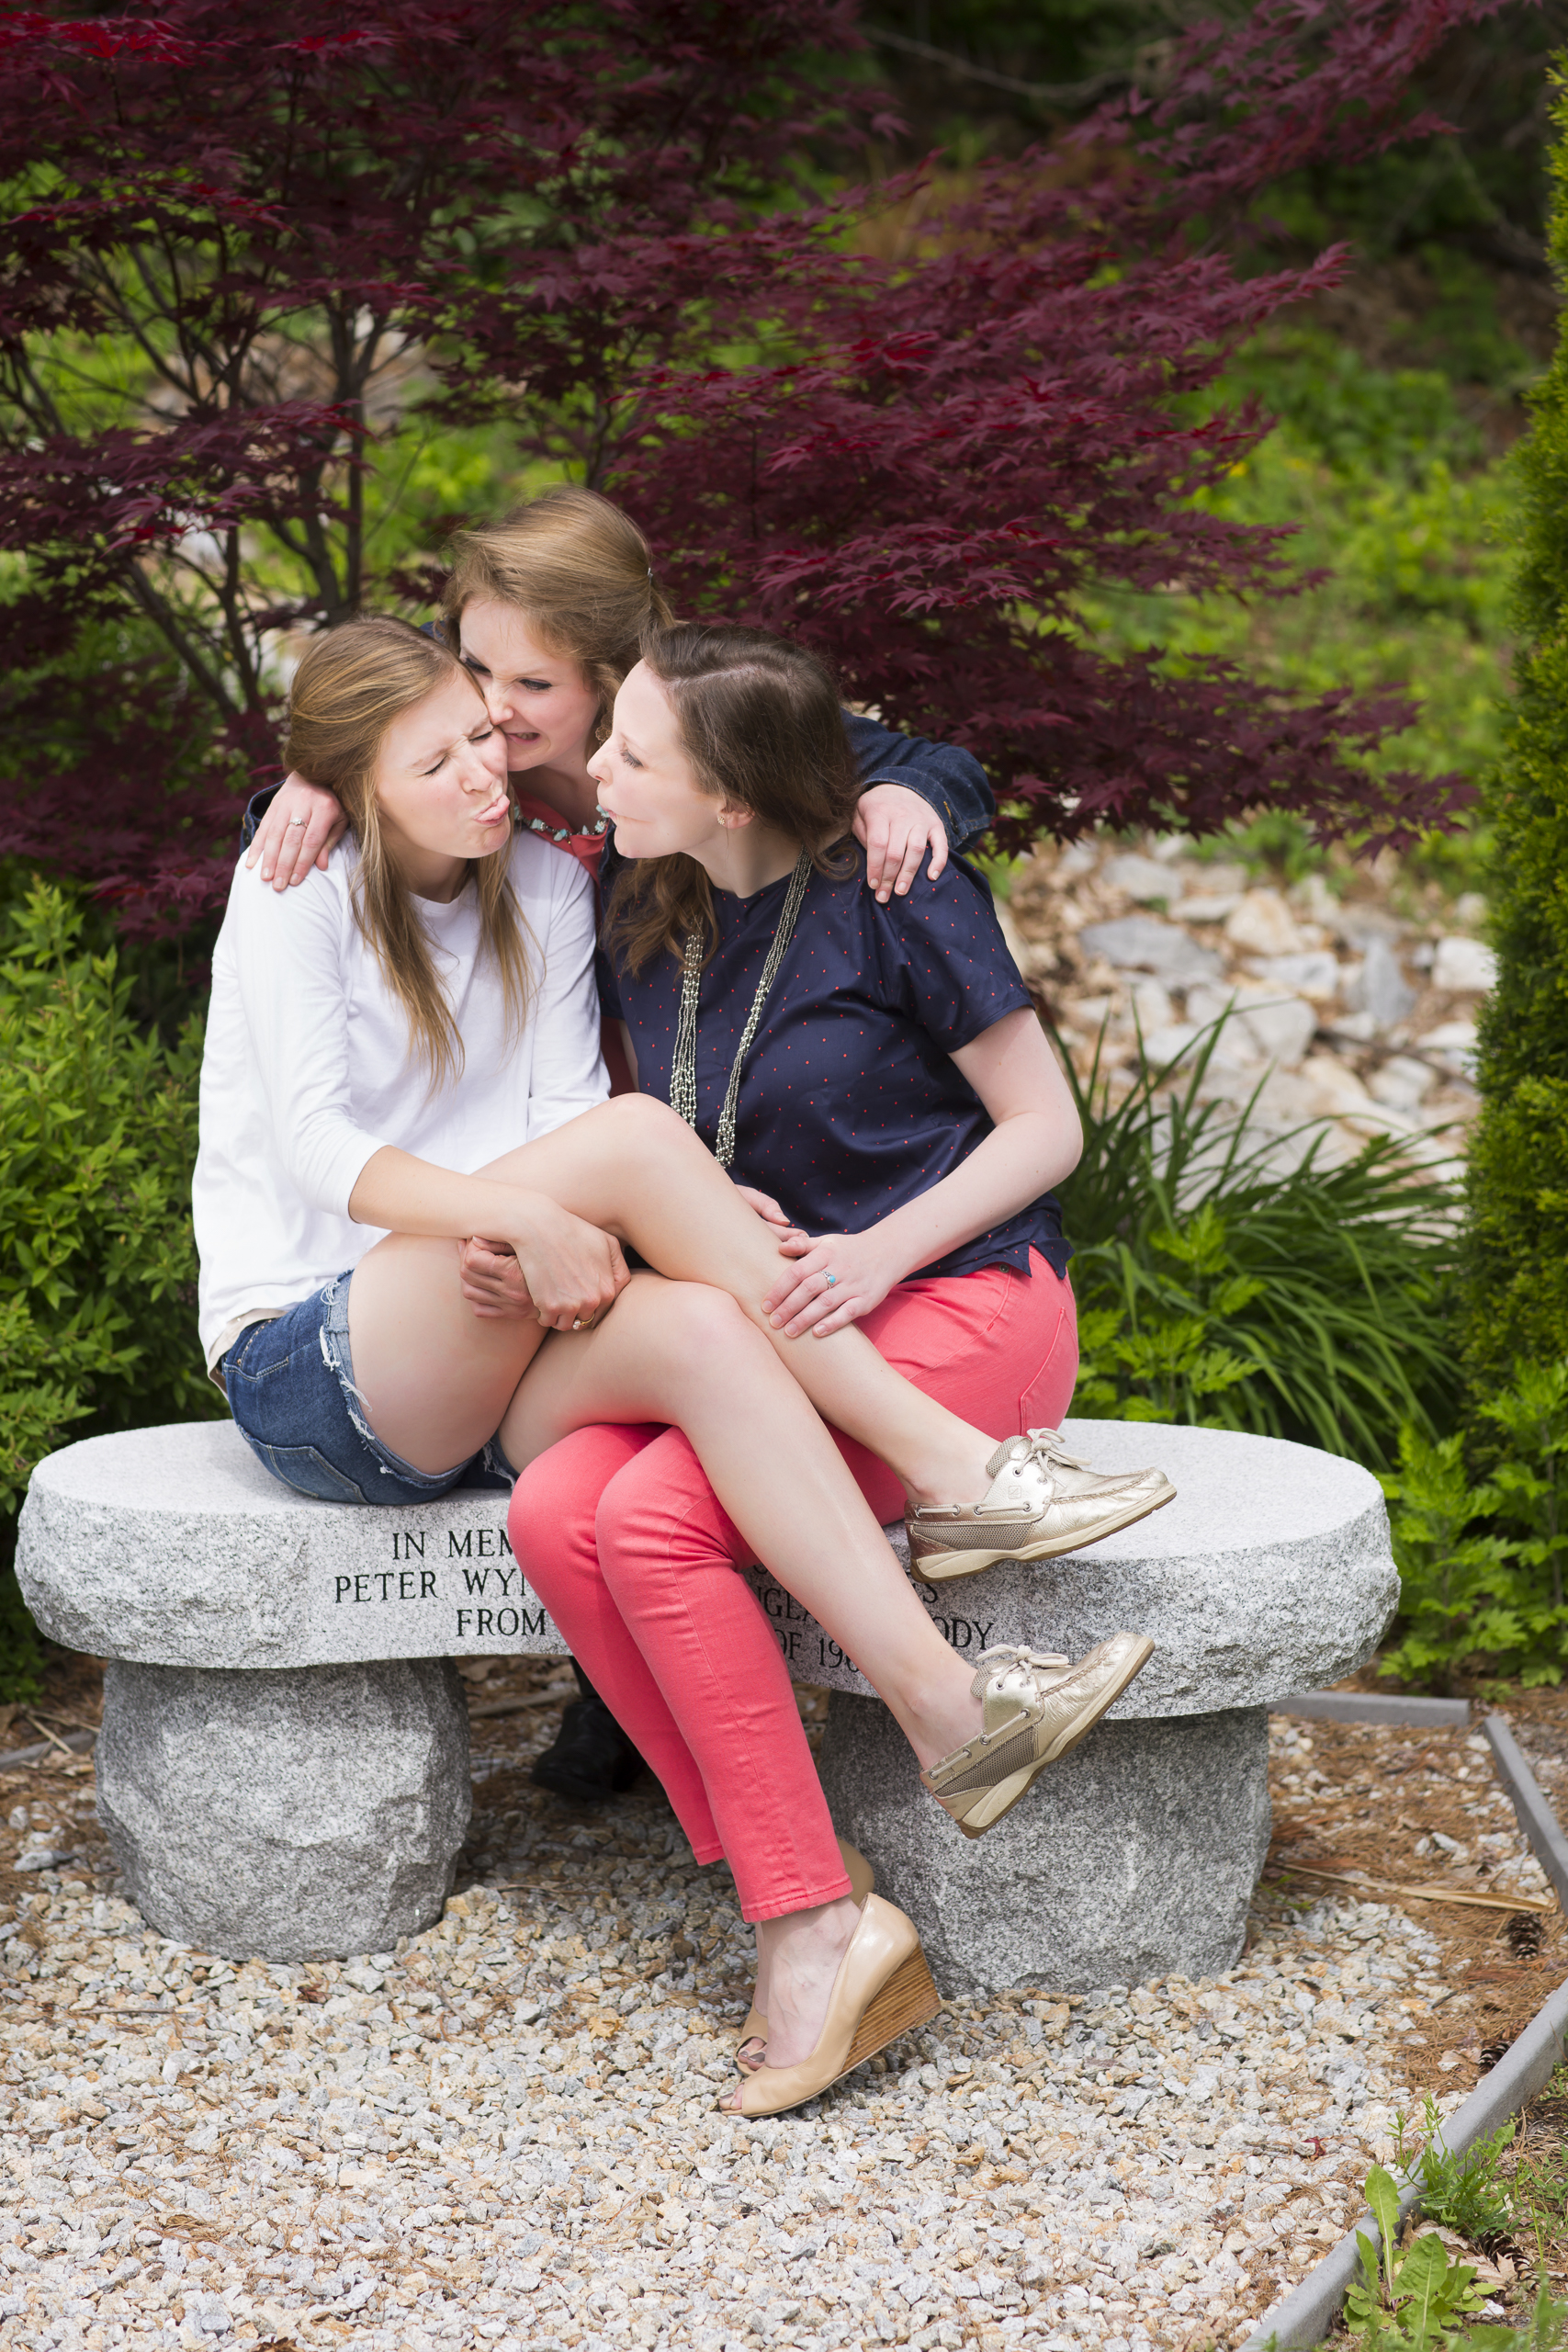 32 3 sisters family portrait outdoor session being silly on stone bench with red maple tree.jpg